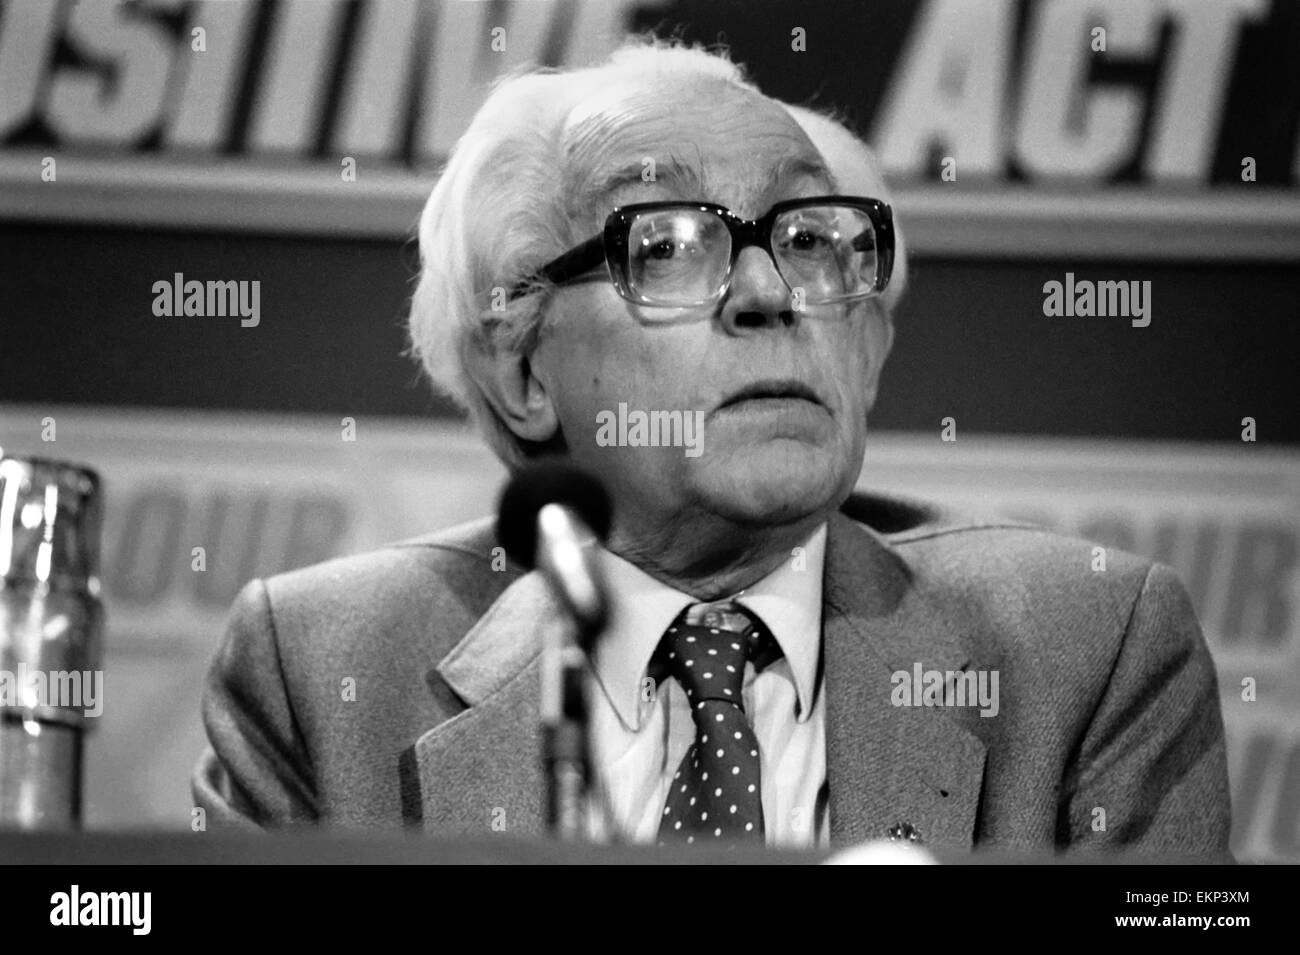 Labour Party Conference: Labour leader Michael Foot at this morning press conference. June 1983 83-3208-023 *** Local Caption *** planman - 03/03/2010 Stock Photo